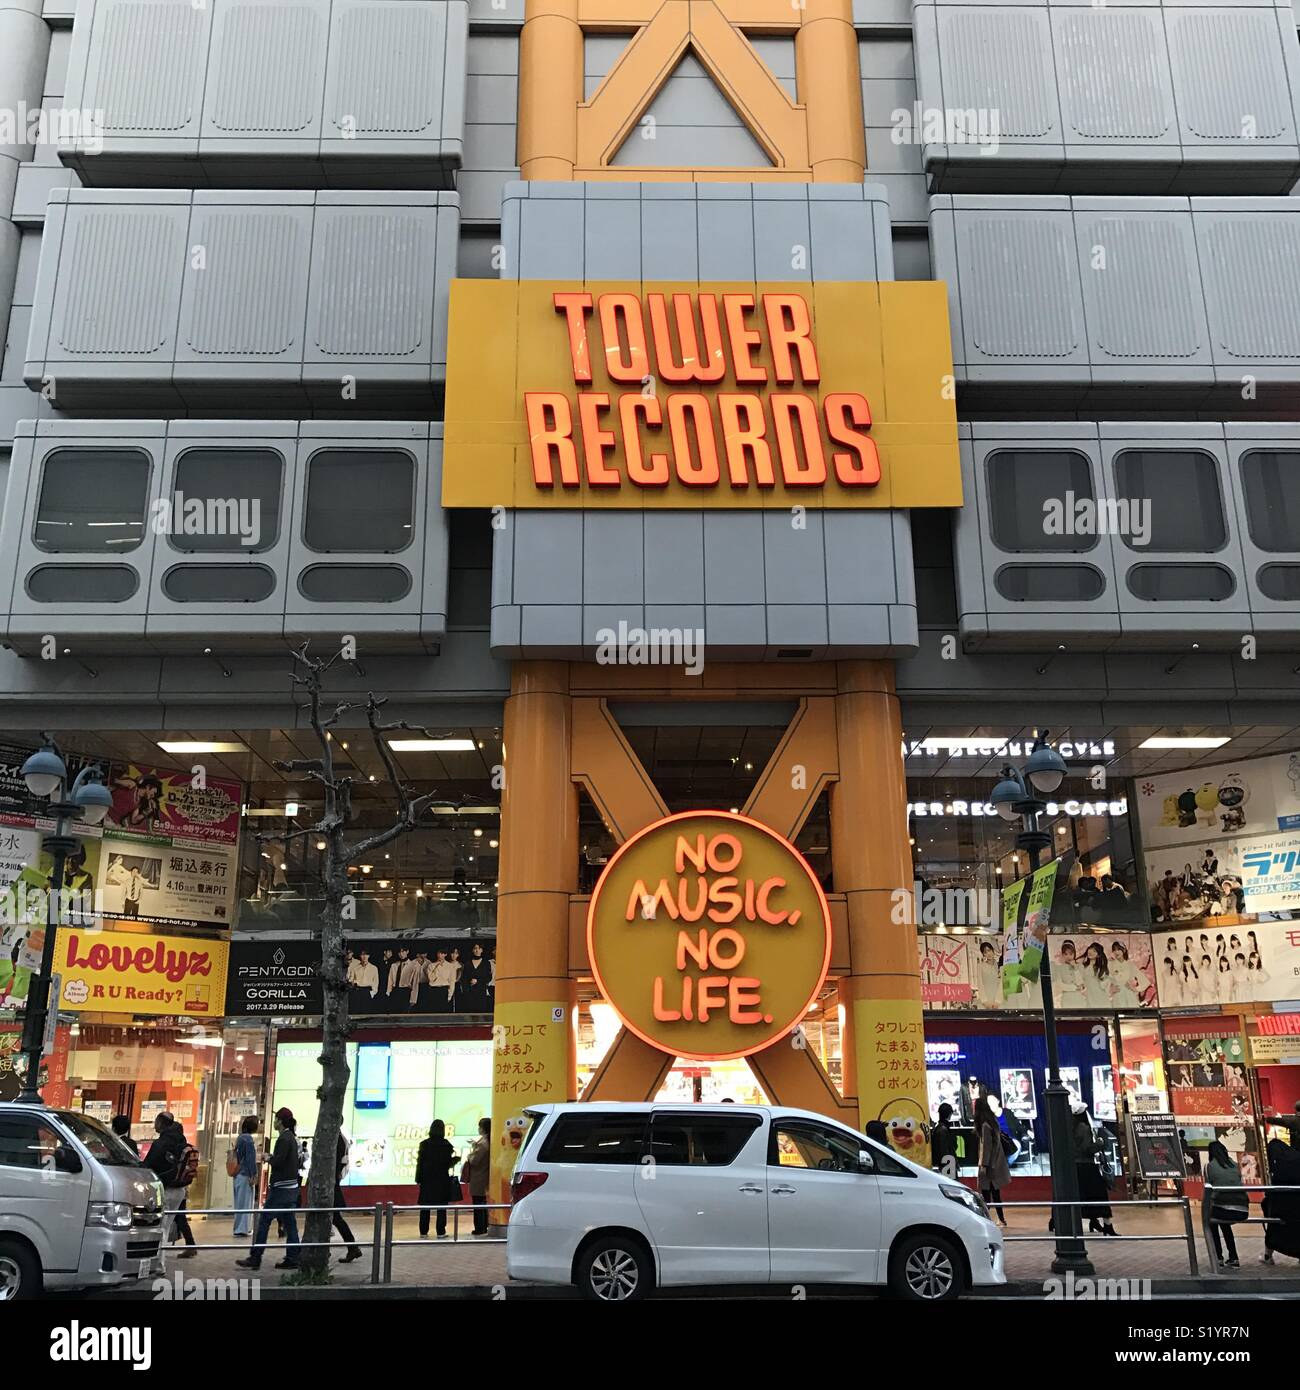 Tower records Stock Photo